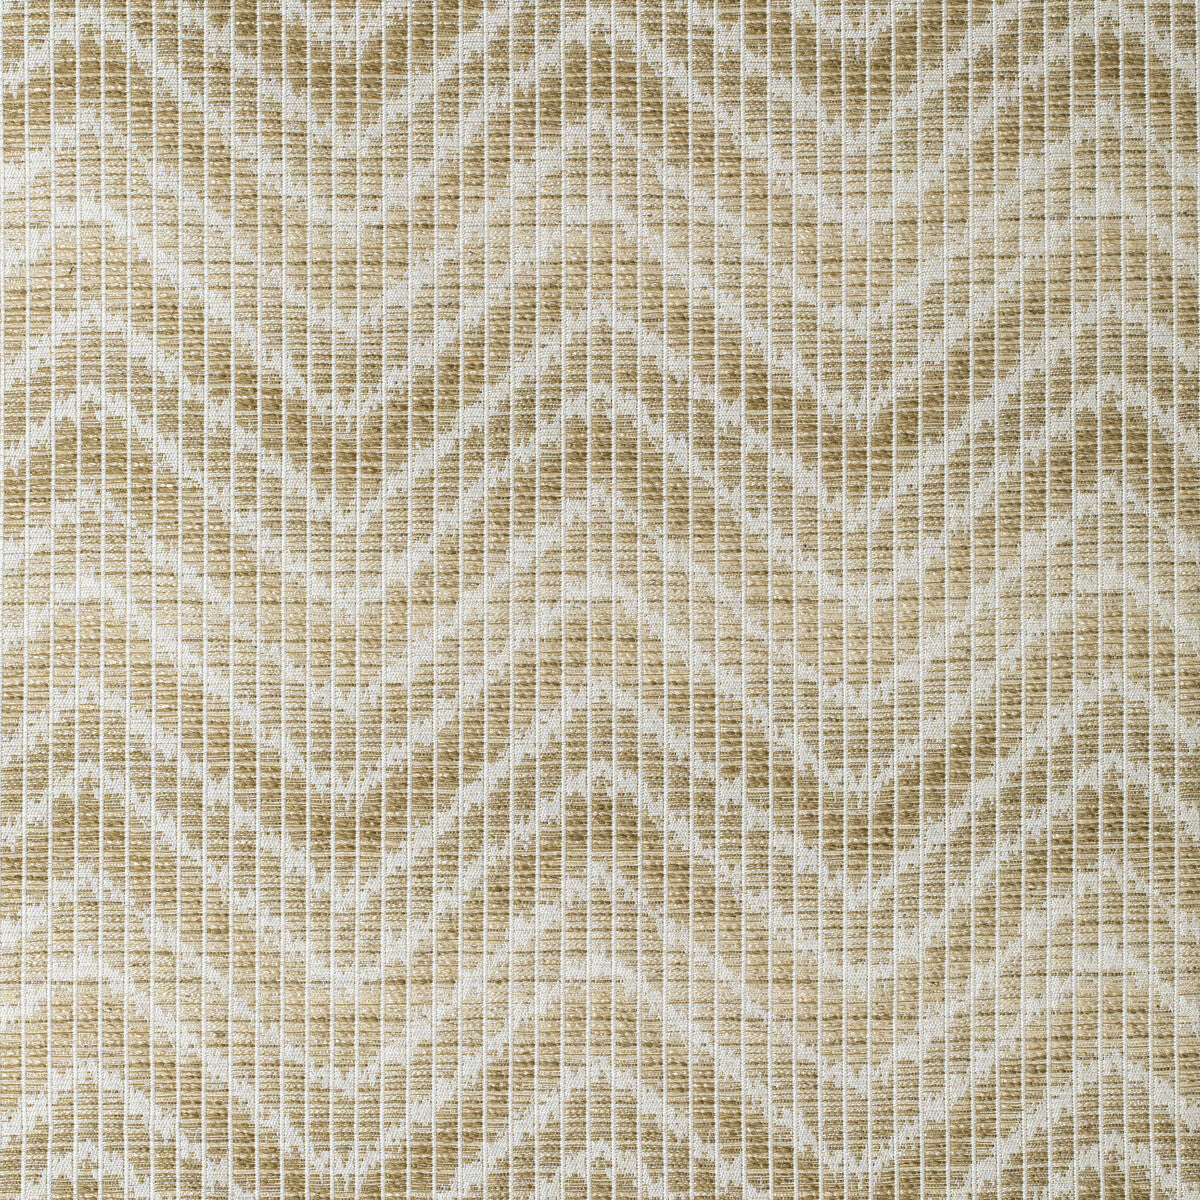 Chausey Woven fabric in beige color - pattern 8020106.16.0 - by Brunschwig &amp; Fils in the Granville Weaves collection